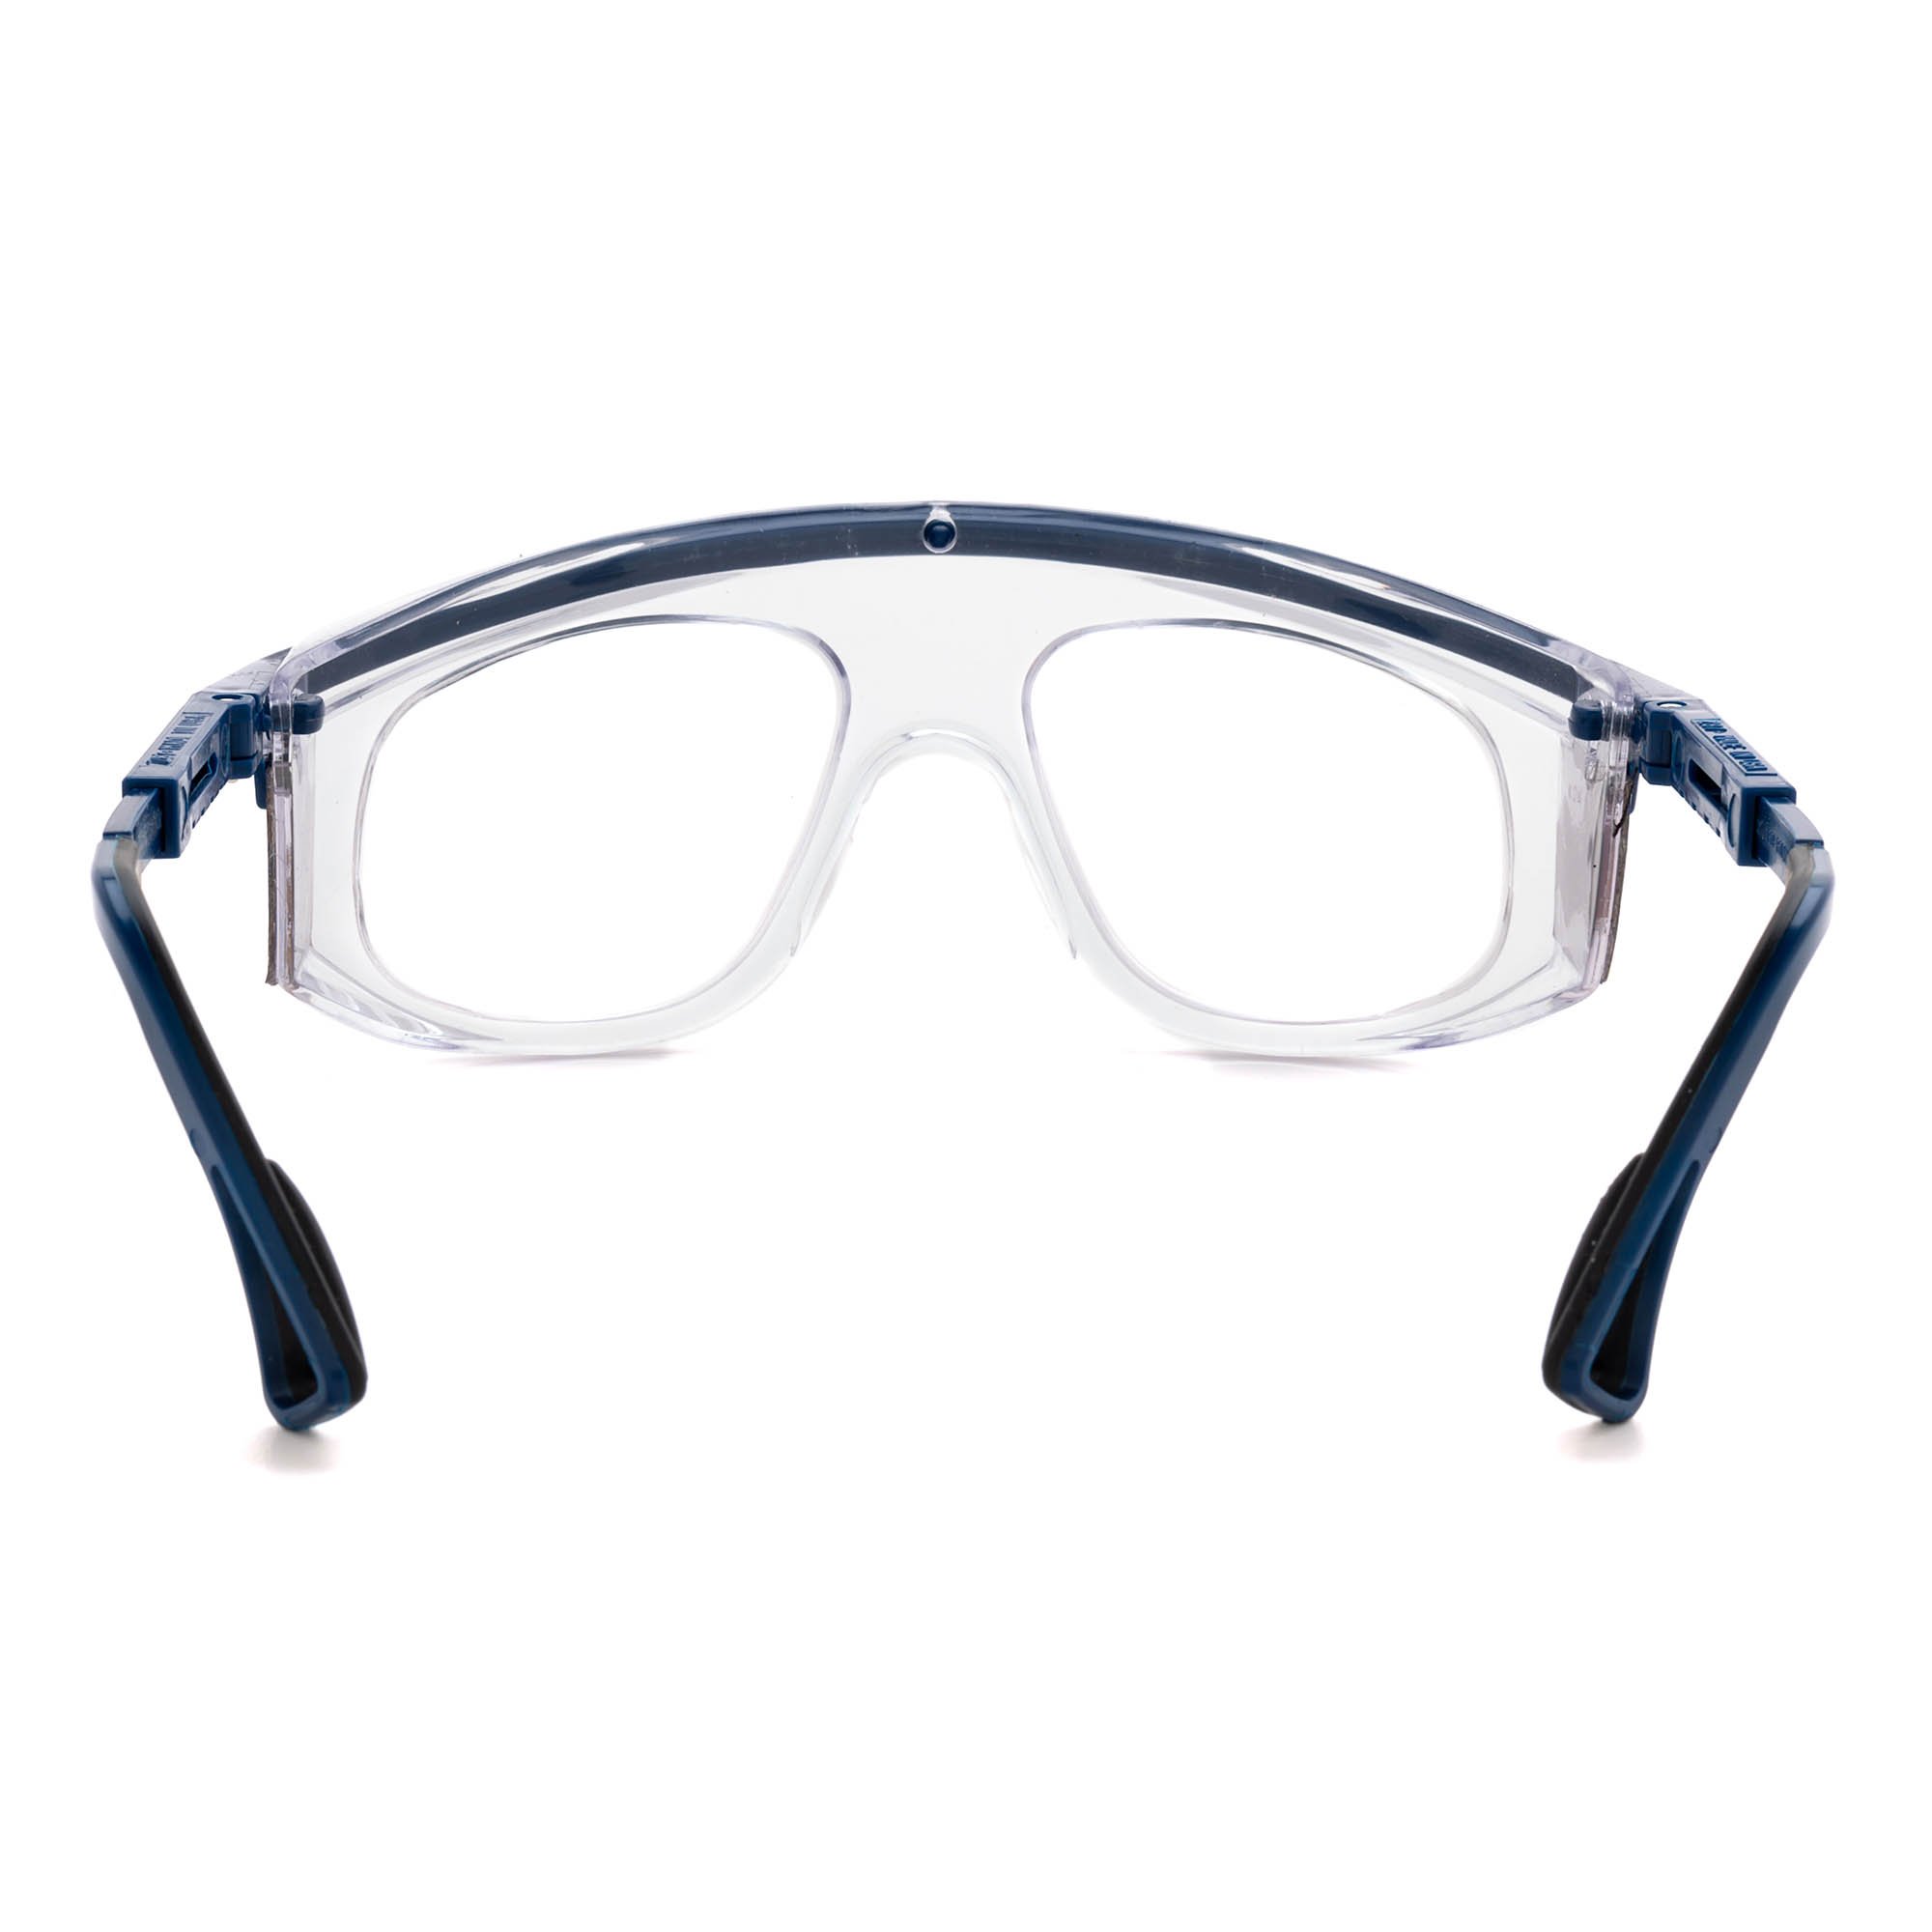 Astro Lead Glasses w/ Side Shields - SingleVision - CMX Medical